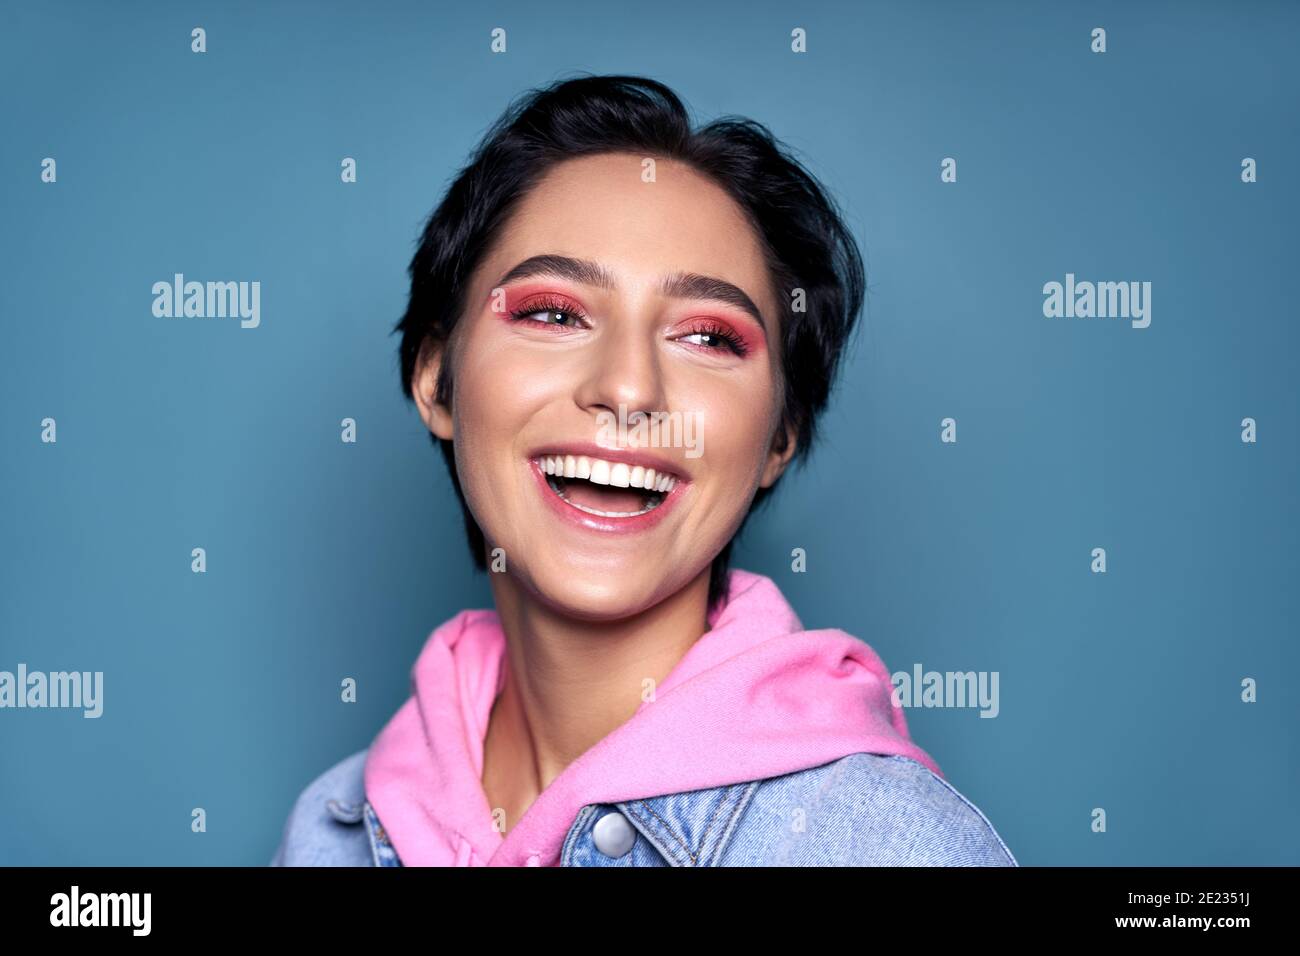 Happy teen girl face with dental healthy smile isolated on blue background Stock Photo